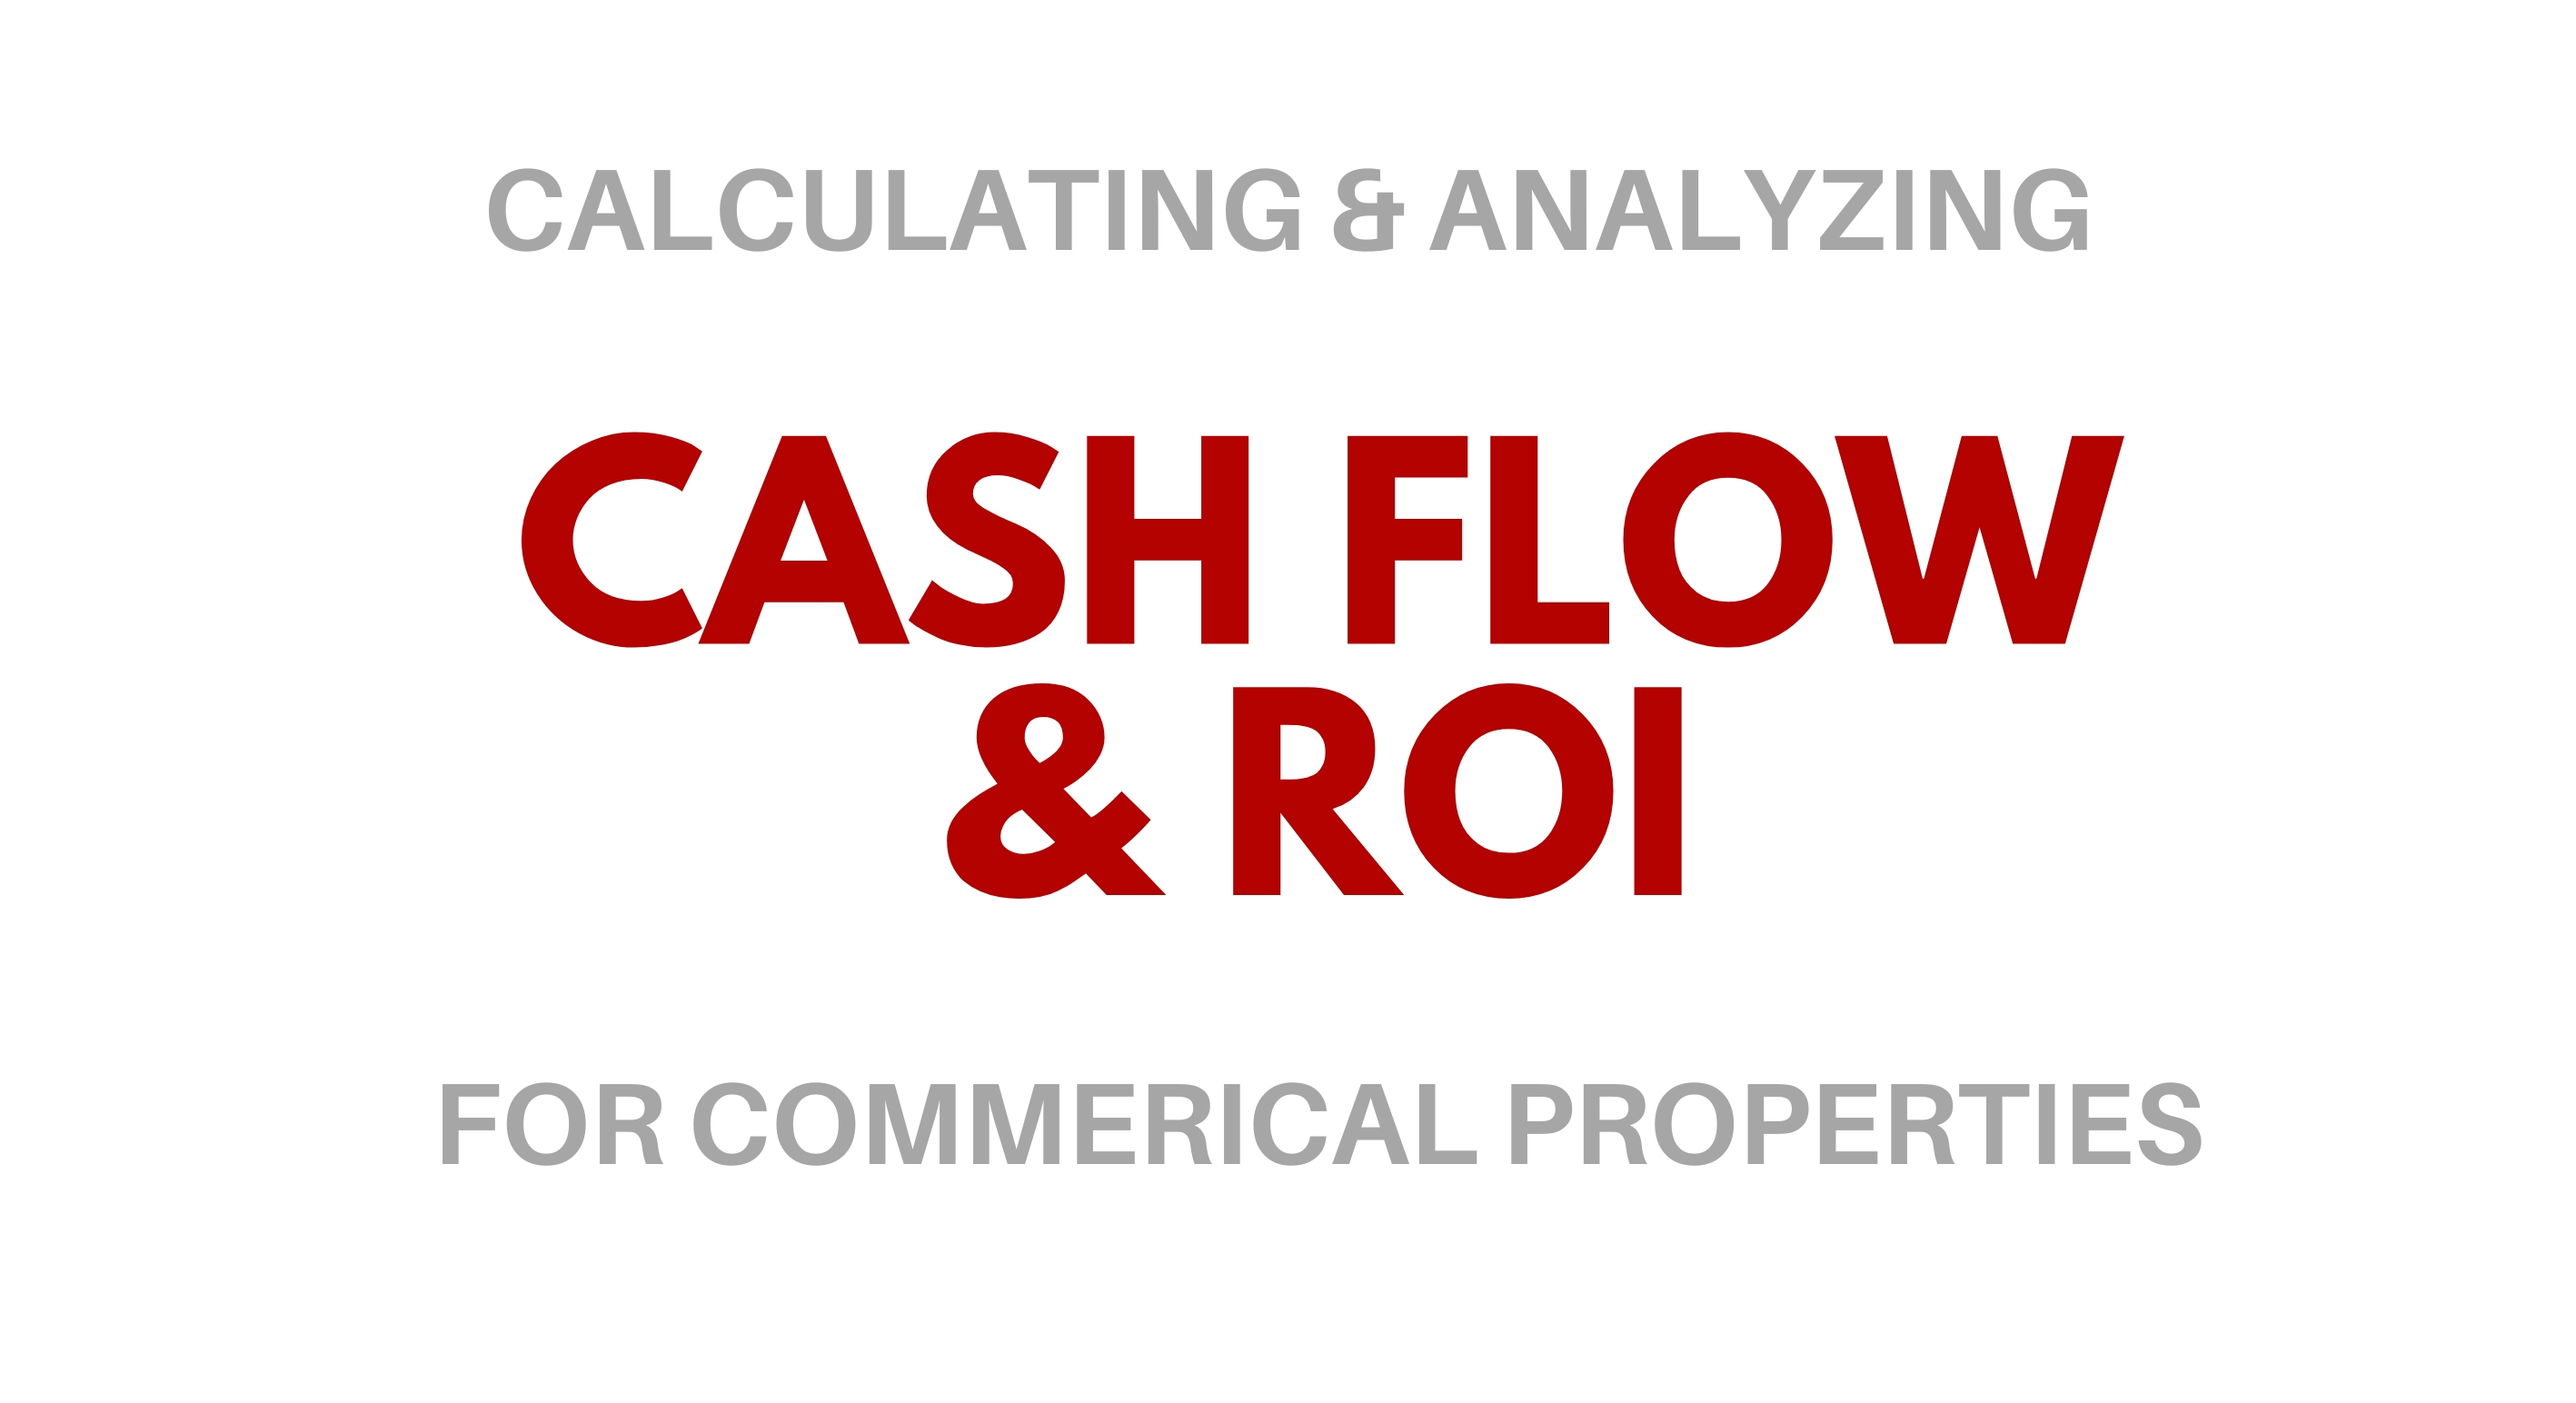 Calculating and analyzing cash flow and rates of return for commercial properties